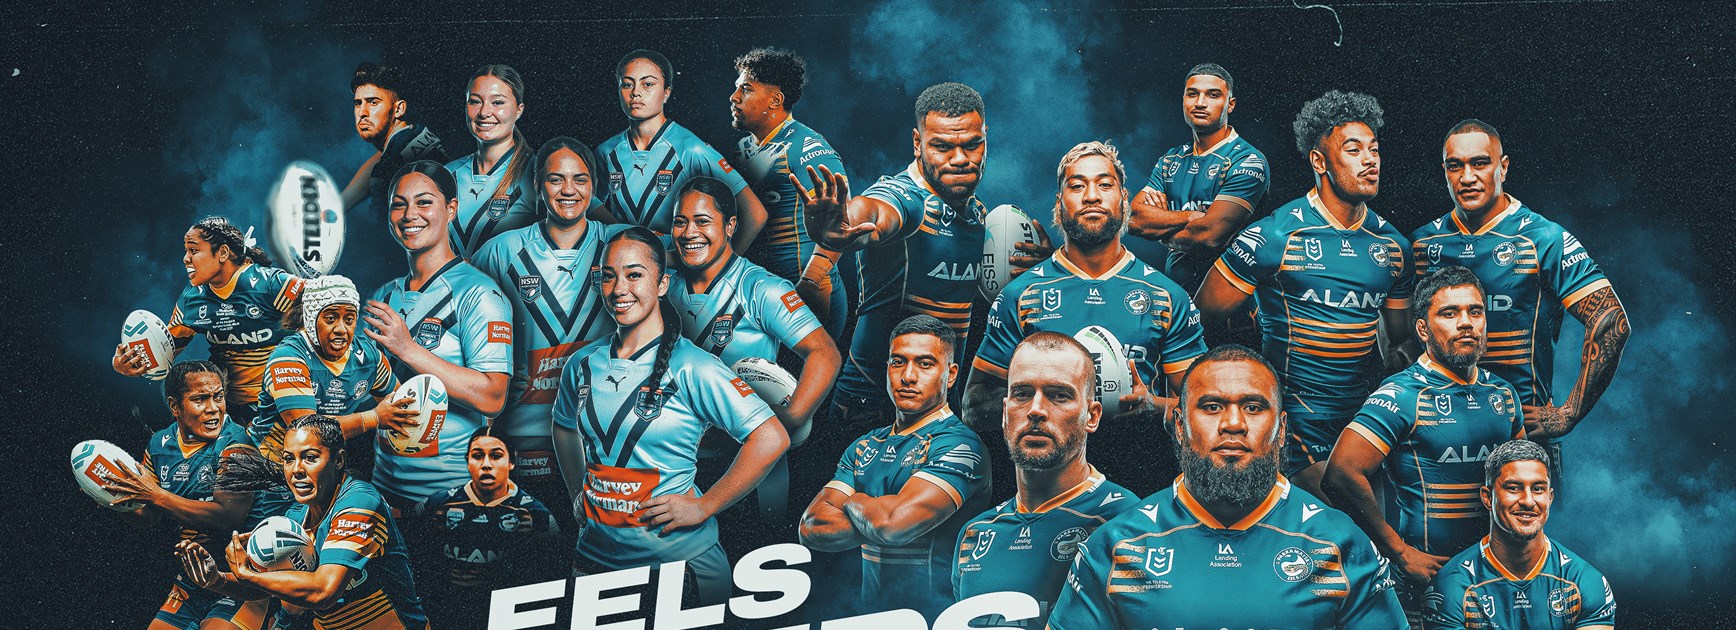 23 Eels Named In Rep Squad